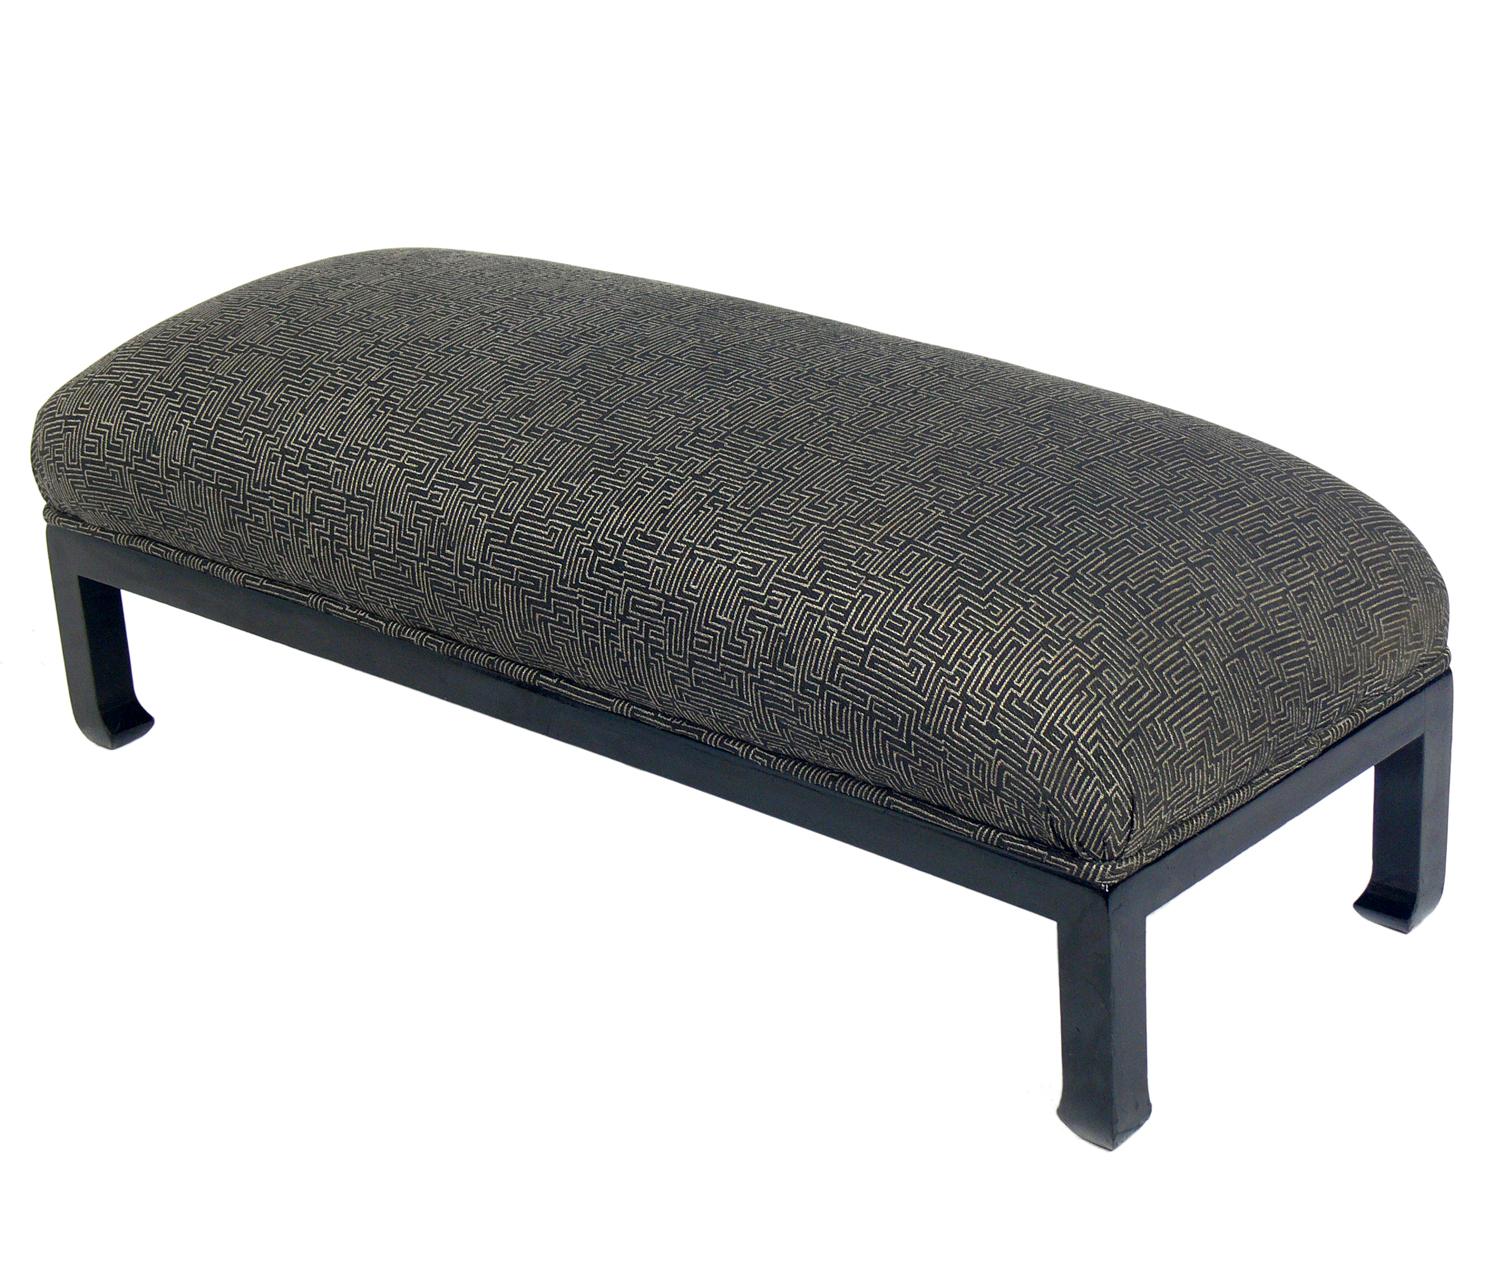 Low Slung Asian inspired midcentury bench, American, circa 1950s. This piece was probably reupholstered in it's Asian style geometric fabric within the past few years. Black lacquered base appears to be the original finish.